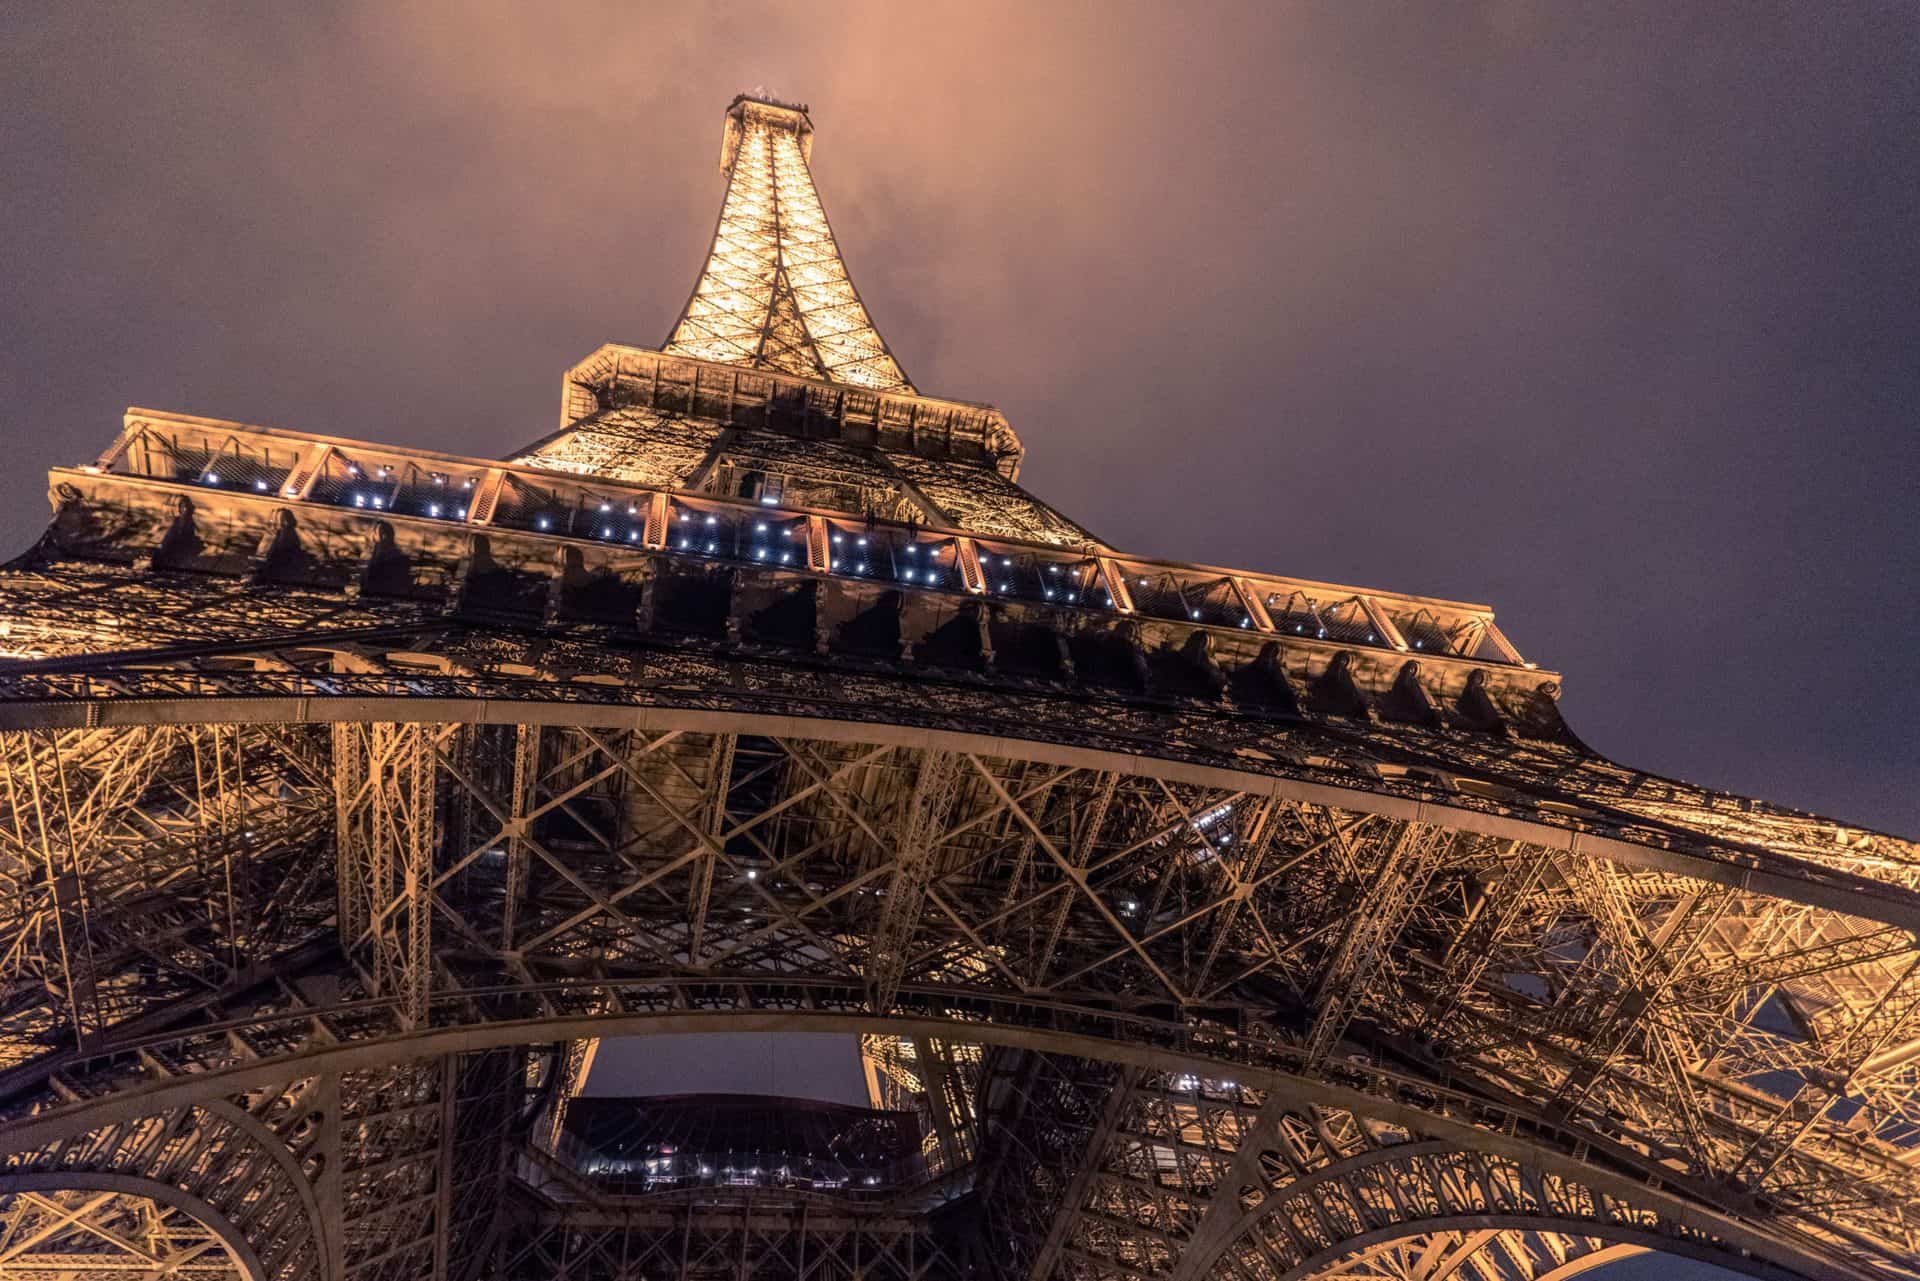 The view of the Eiffel Tower from ground level at night